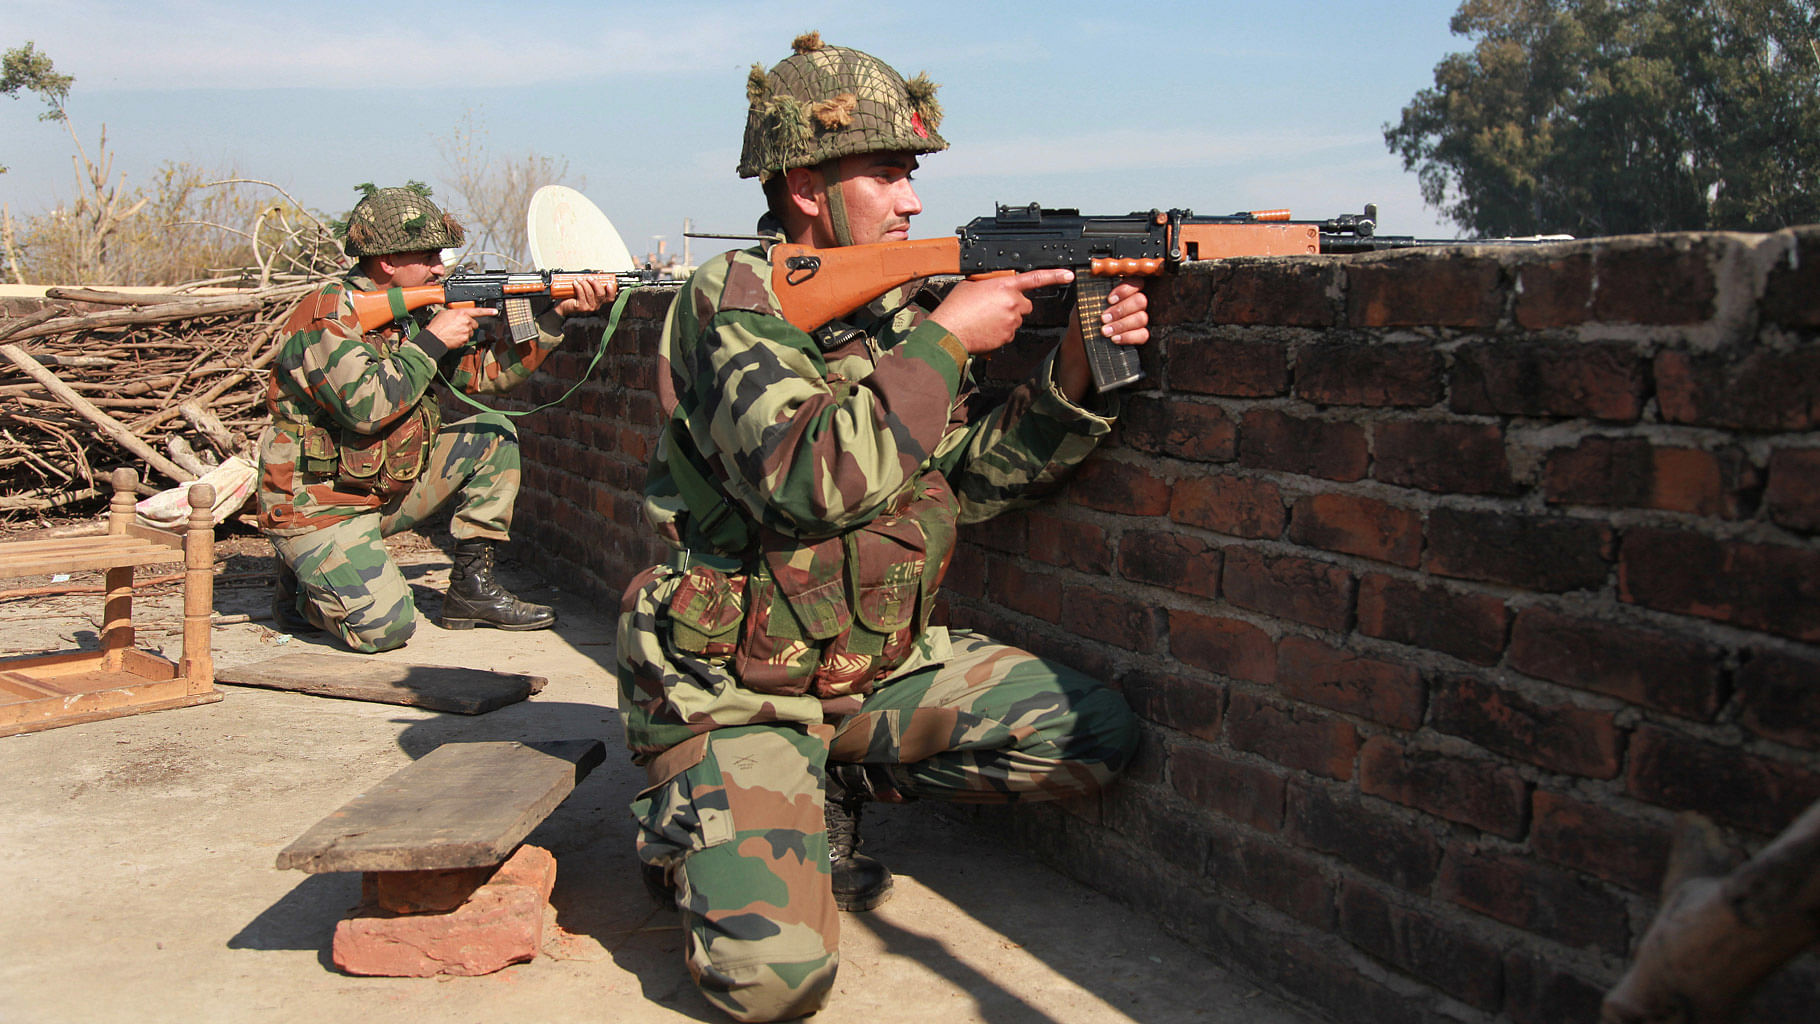 Indian Army is retaliating strongly and effectively, said a Defence spokesperson. Representational image of indian Army personnel. (Photo: AP)